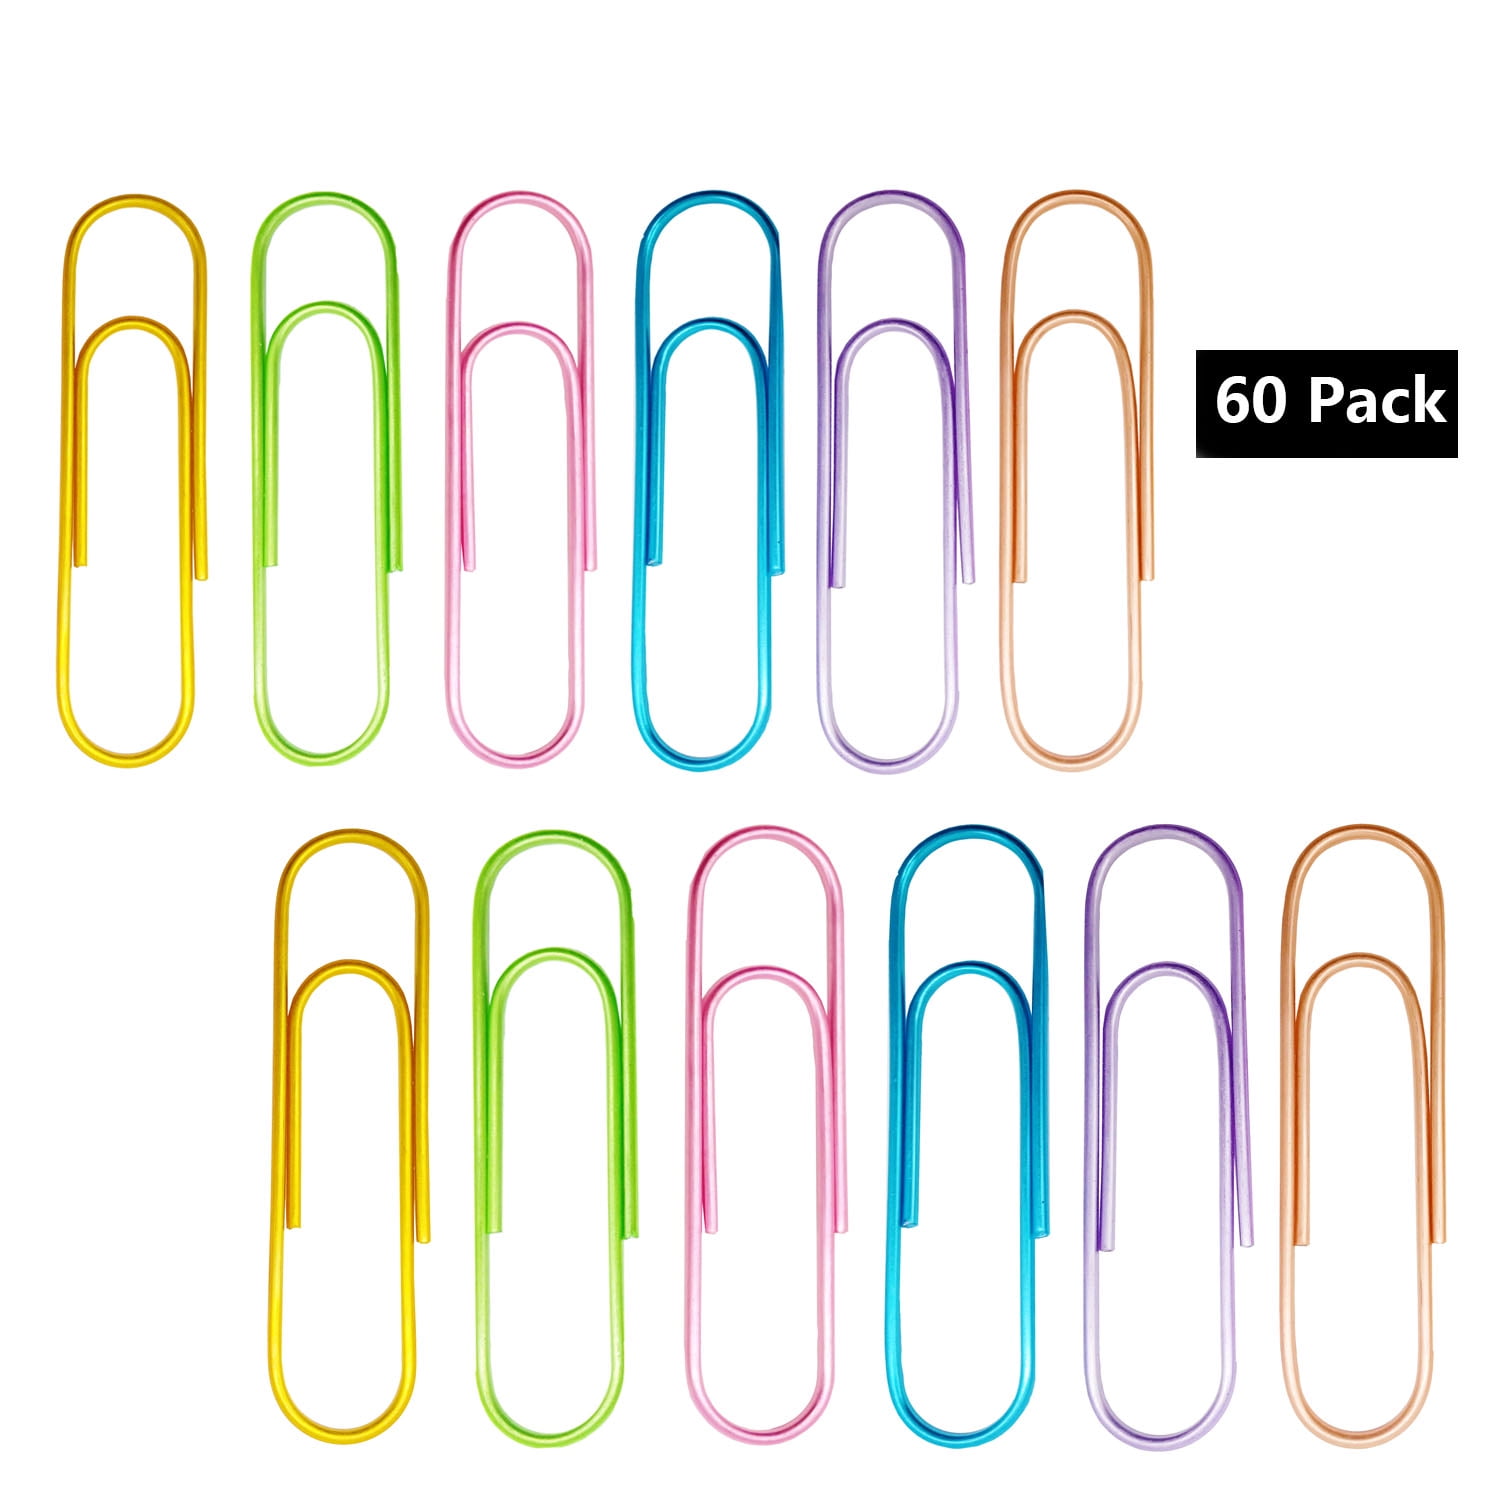 Kbraveo 60 Pack 4 inches Multicolored Super Large Paperclips,Jumbo ...